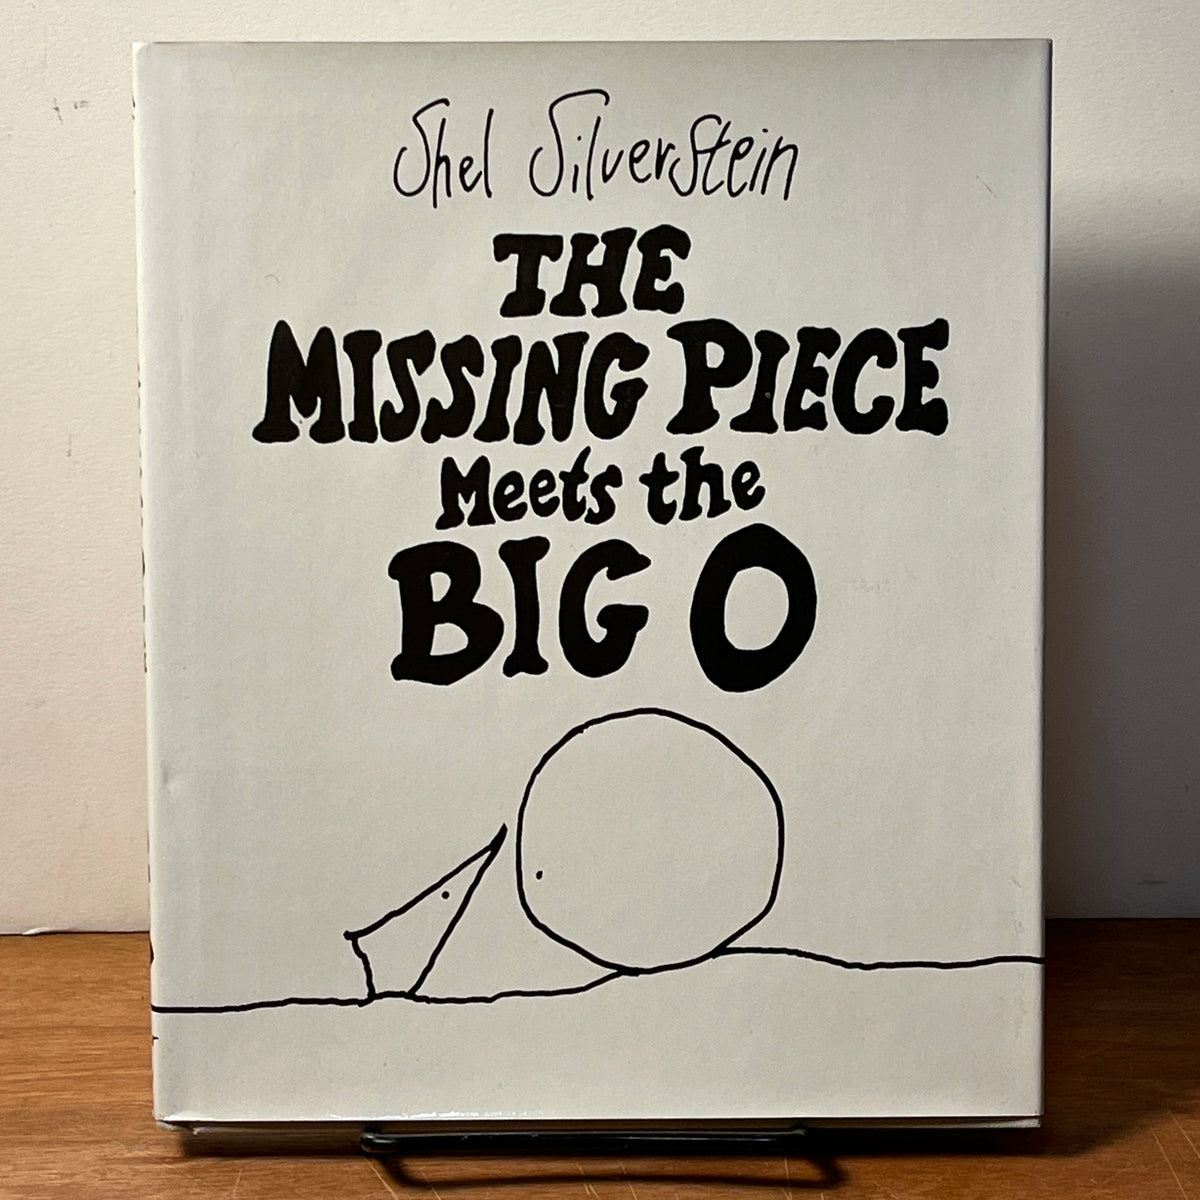 The Missing Piece Meets the Big O, Shel Silverstein, 1981, First Edition, HC, VG.